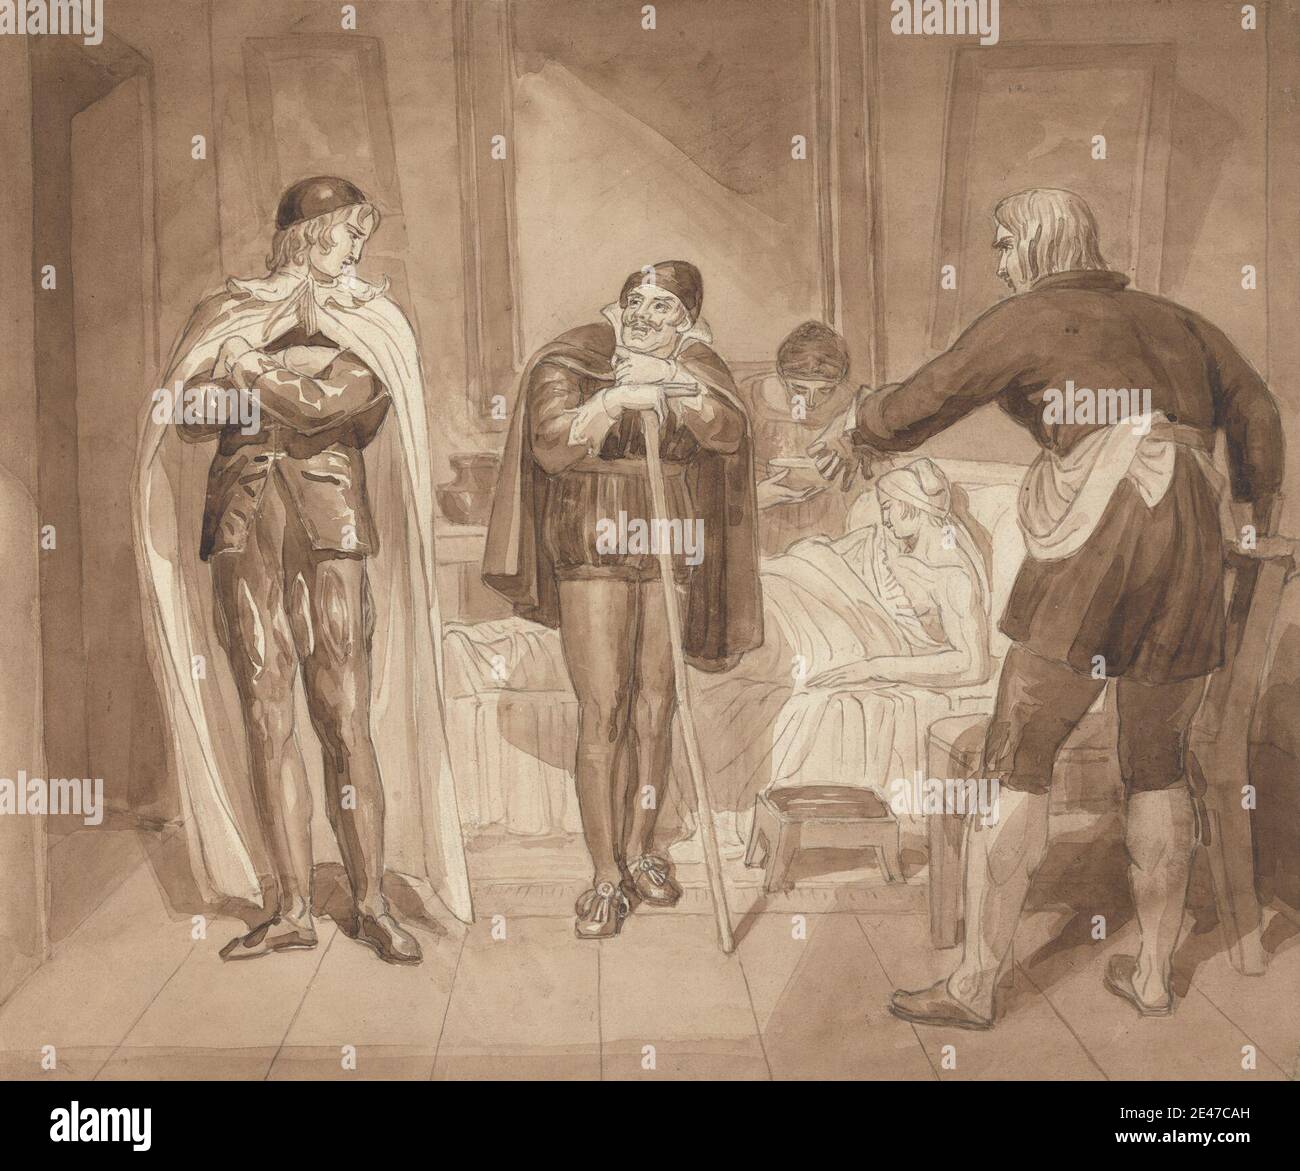 Joshua Cristall, 1768–1847, British, Gil Blas, While Practising Medicine under Dr. Sangrado, Encounters Dr. Cuchillo at the Bedside of the Grocer, between 1820 and 1822. Brown wash and brown ink over graphite on moderately thick, slightly textured, cream wove paper.   bed , boots , breeches (trousers) , caps (headgear) , chairs , coats , illness , illustration , L'Histoire de Gil Blas de Santillane (1715-1735) , literary theme , men , pelerines , picaresque novel , pillows , sheets (bed coverings) , stockings , stools , women. Gil Blas Dr. Sangrado Dr. Cuchillo Stock Photo